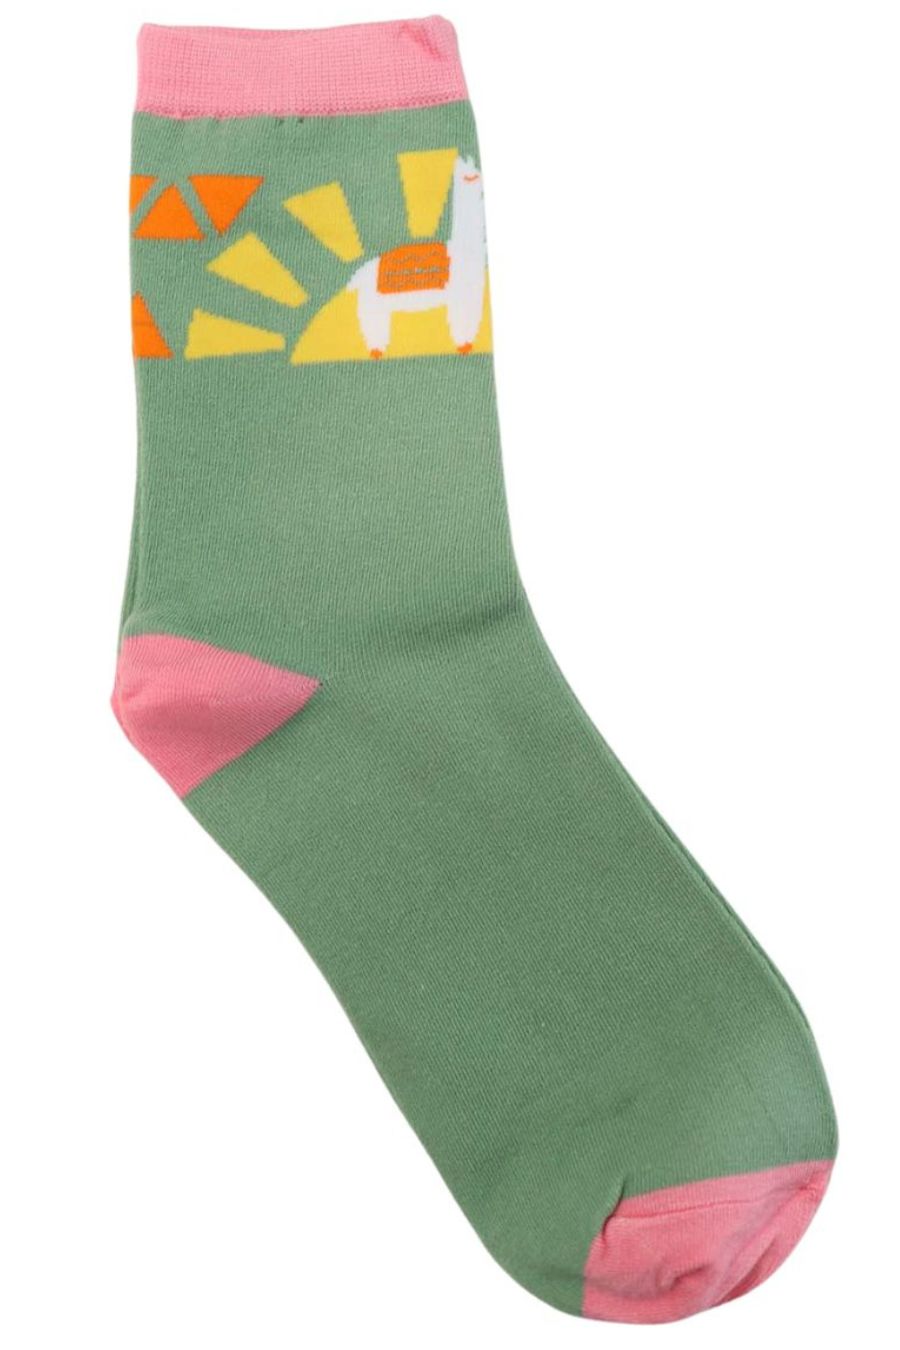 green, pink ankle socks with a yellow sunrise and a llama